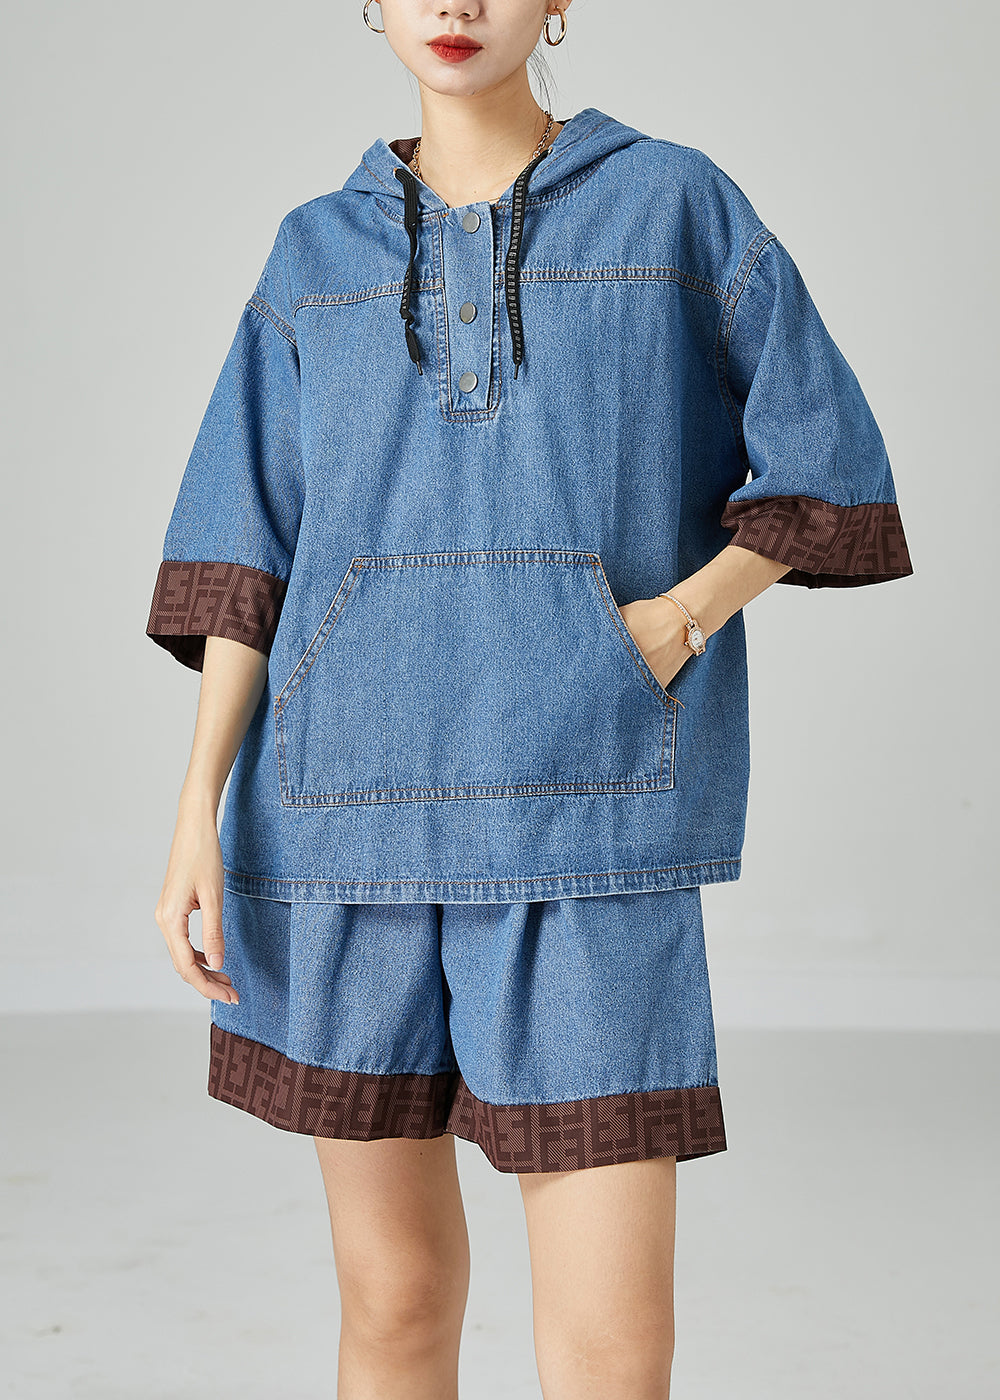 Italian Blue Hooded Patchwork Denim Two Pieces Set Summer LY2474 - fabuloryshop